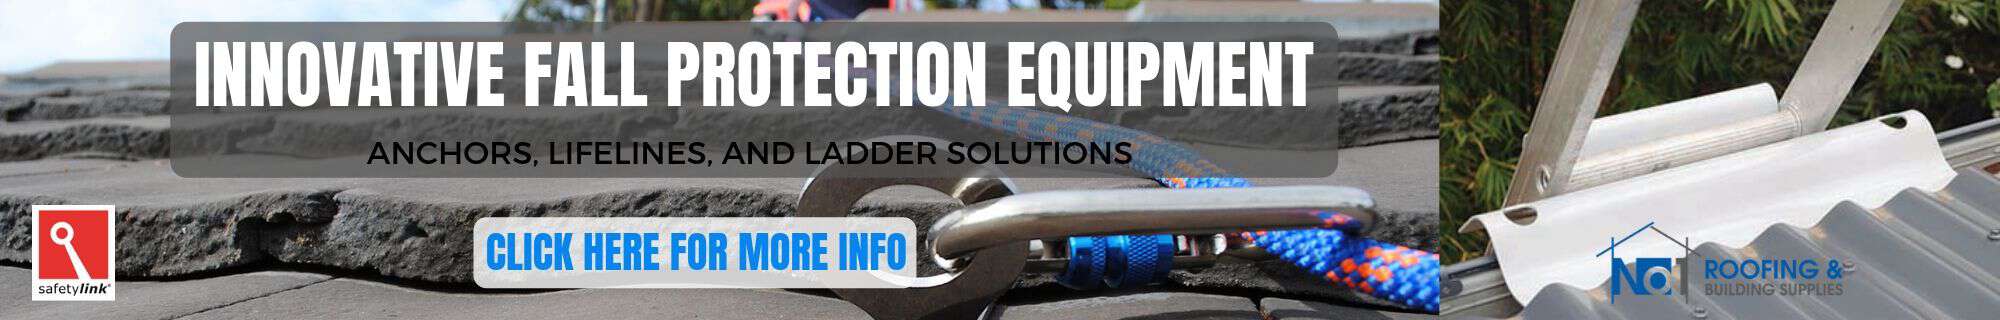 INNOVATIVE FALL PROTECTION EQUIPMENT